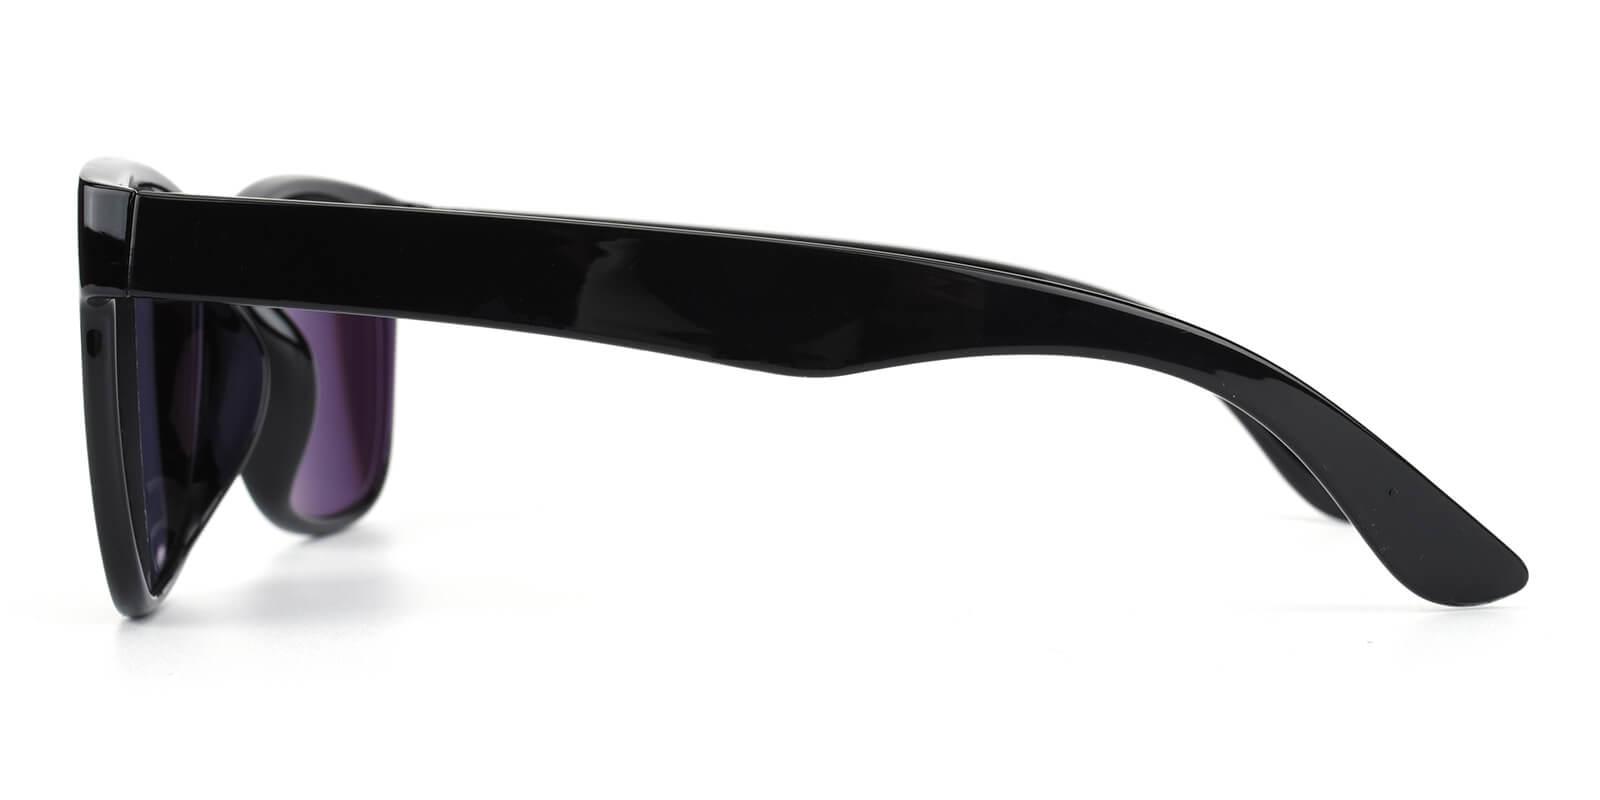 Tracly-Black-Cat / Square-TR-Sunglasses-detail